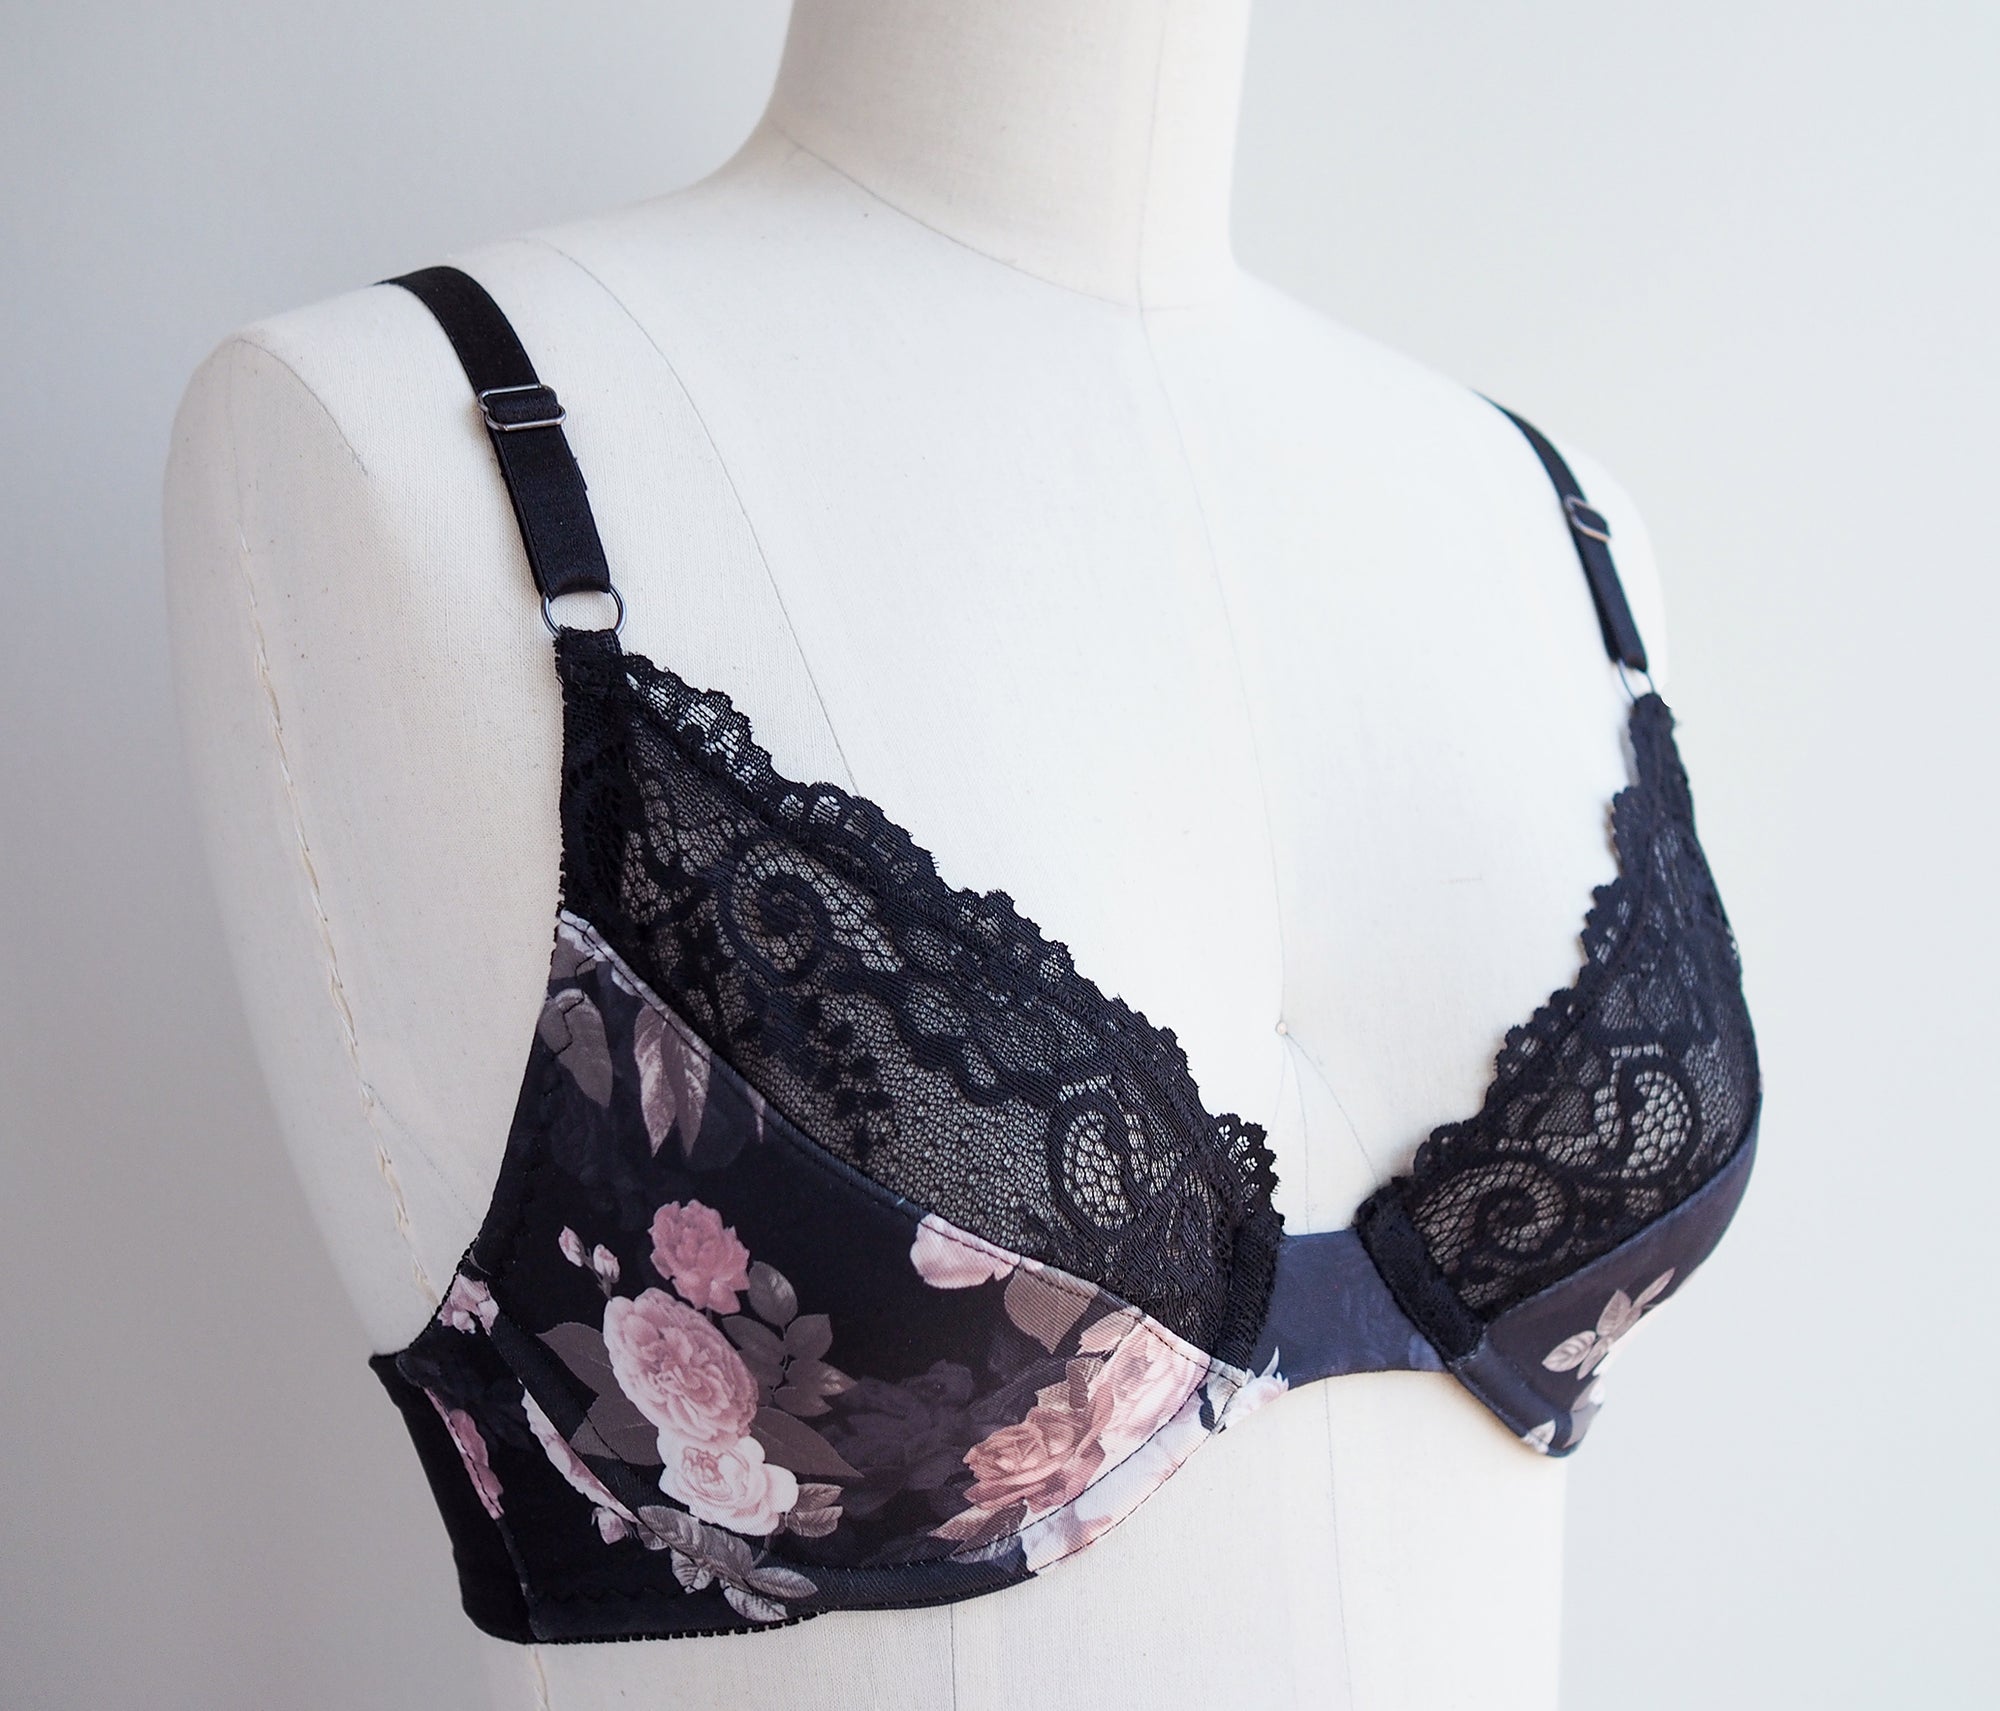 Introducing the Lansdowne Bra Sewing Pattern and Kits!